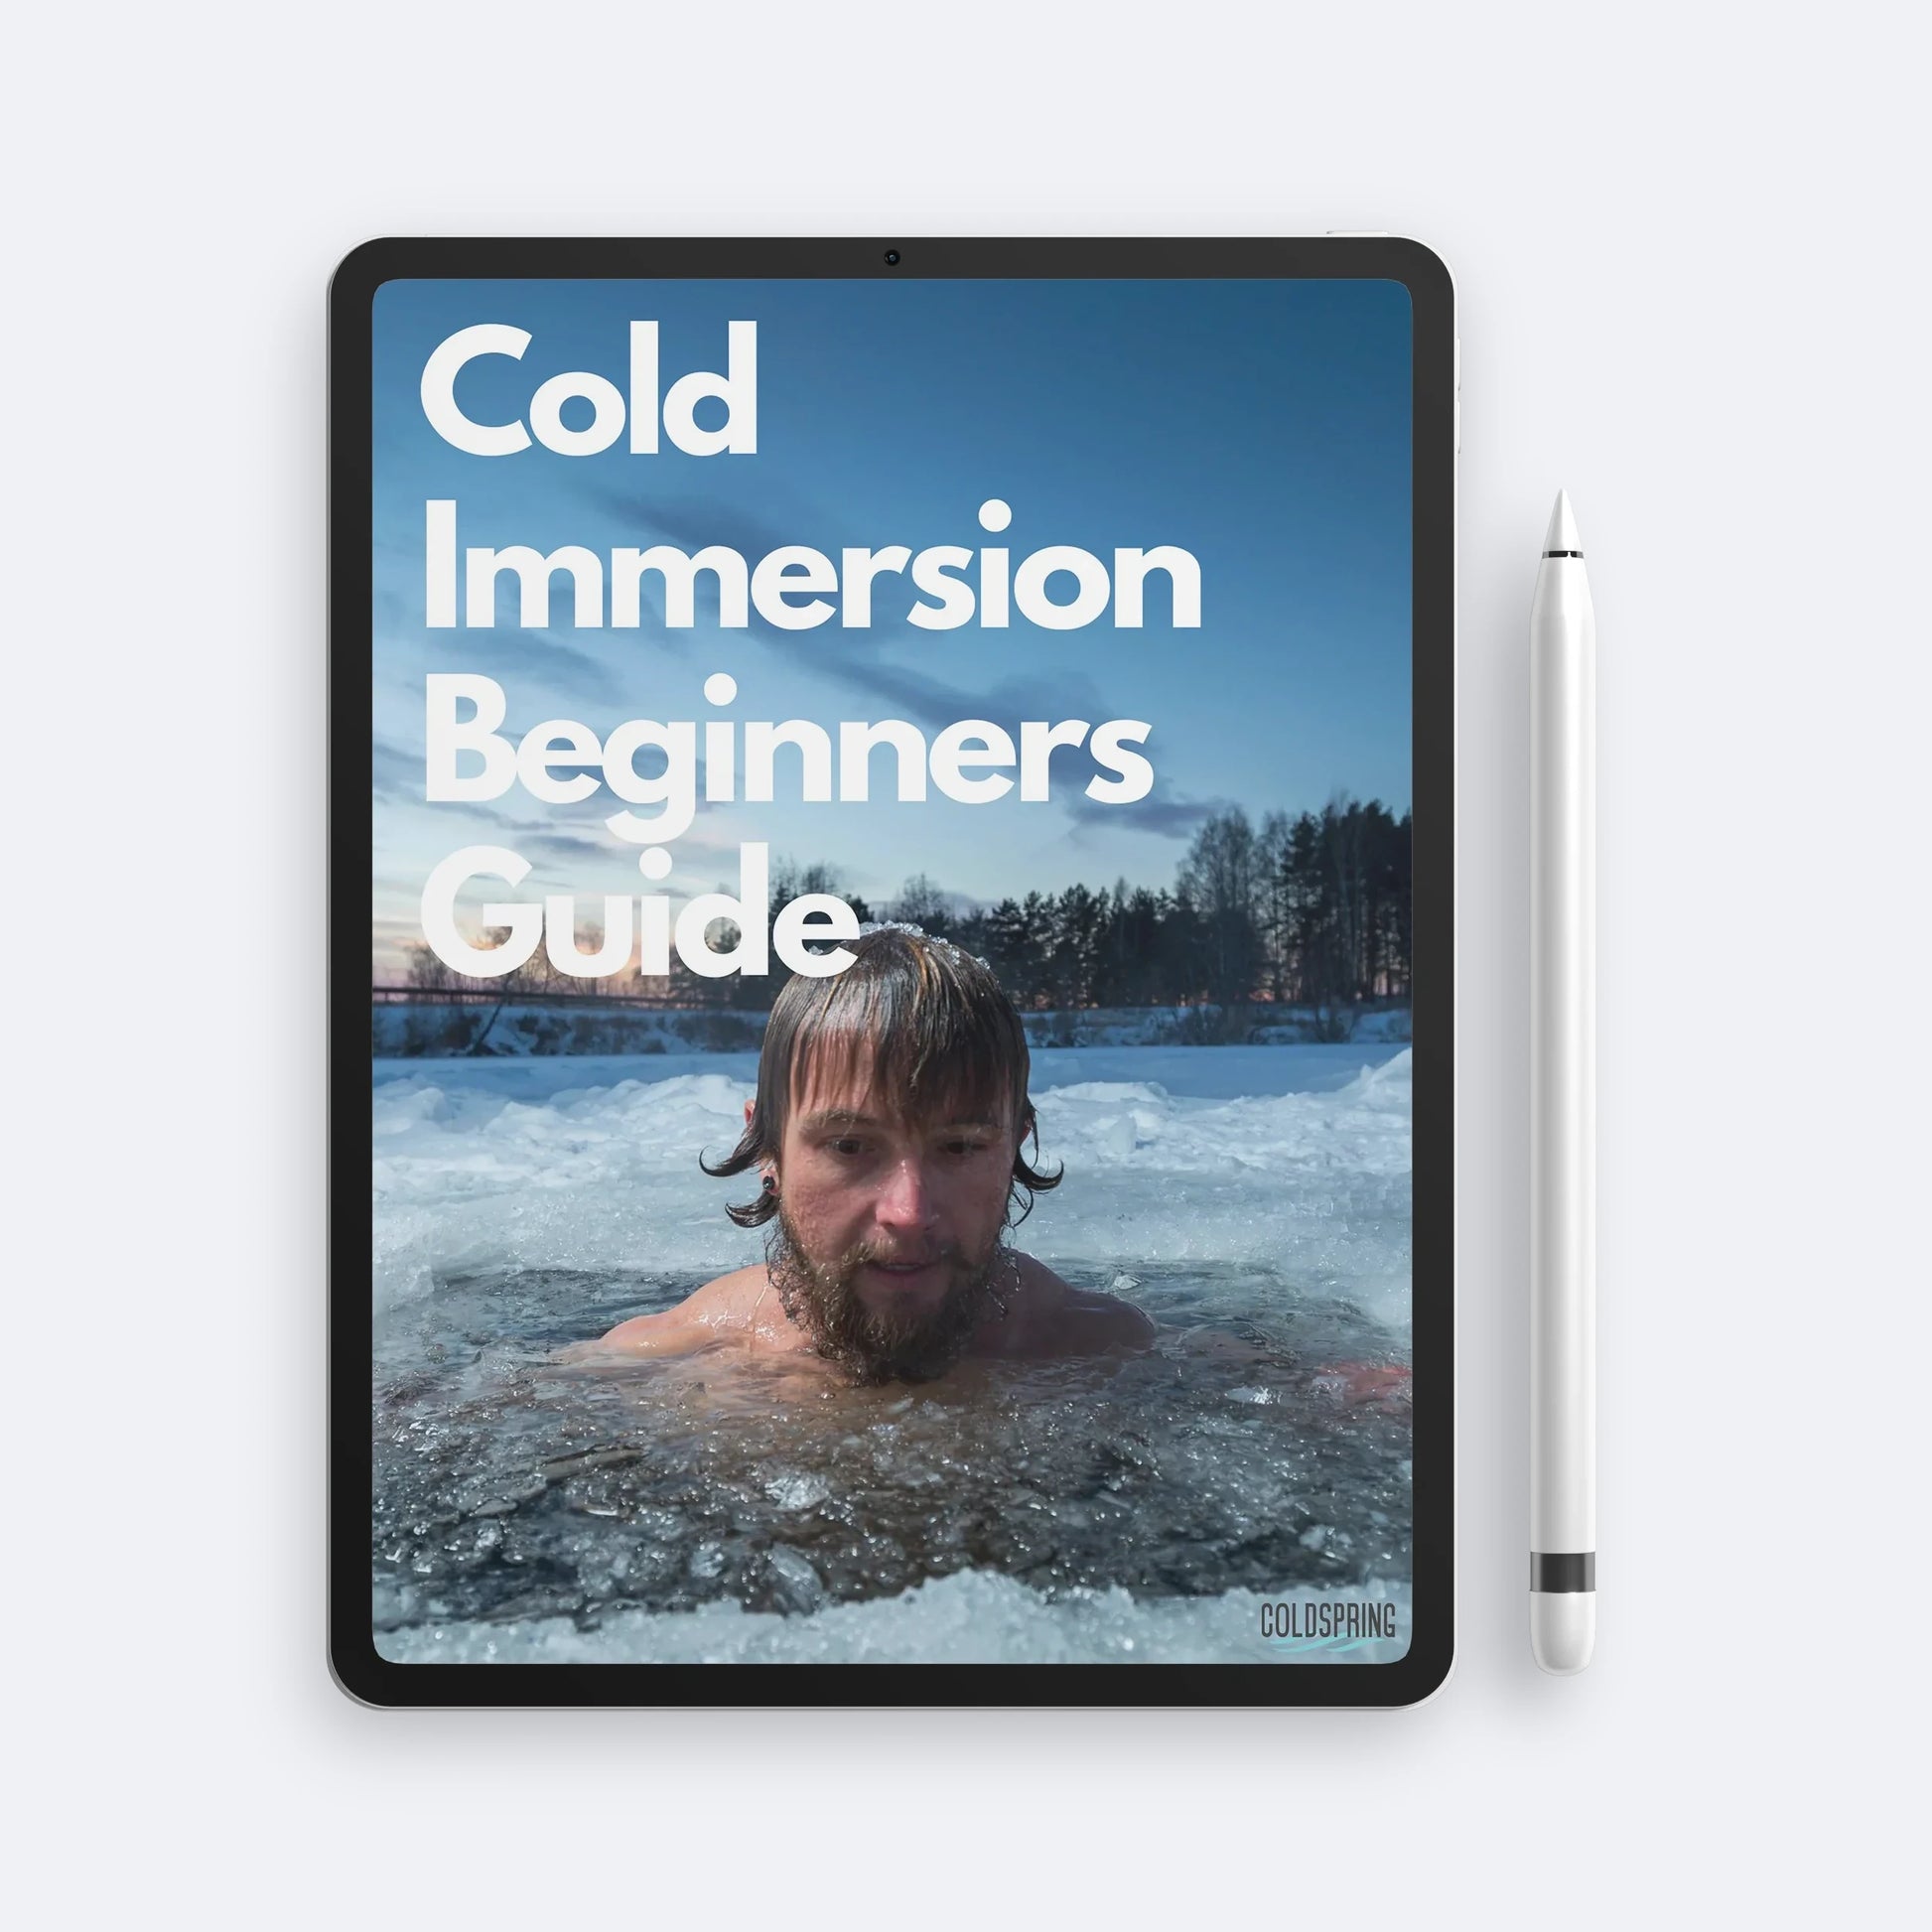 Cold Immersion Beginners Guide